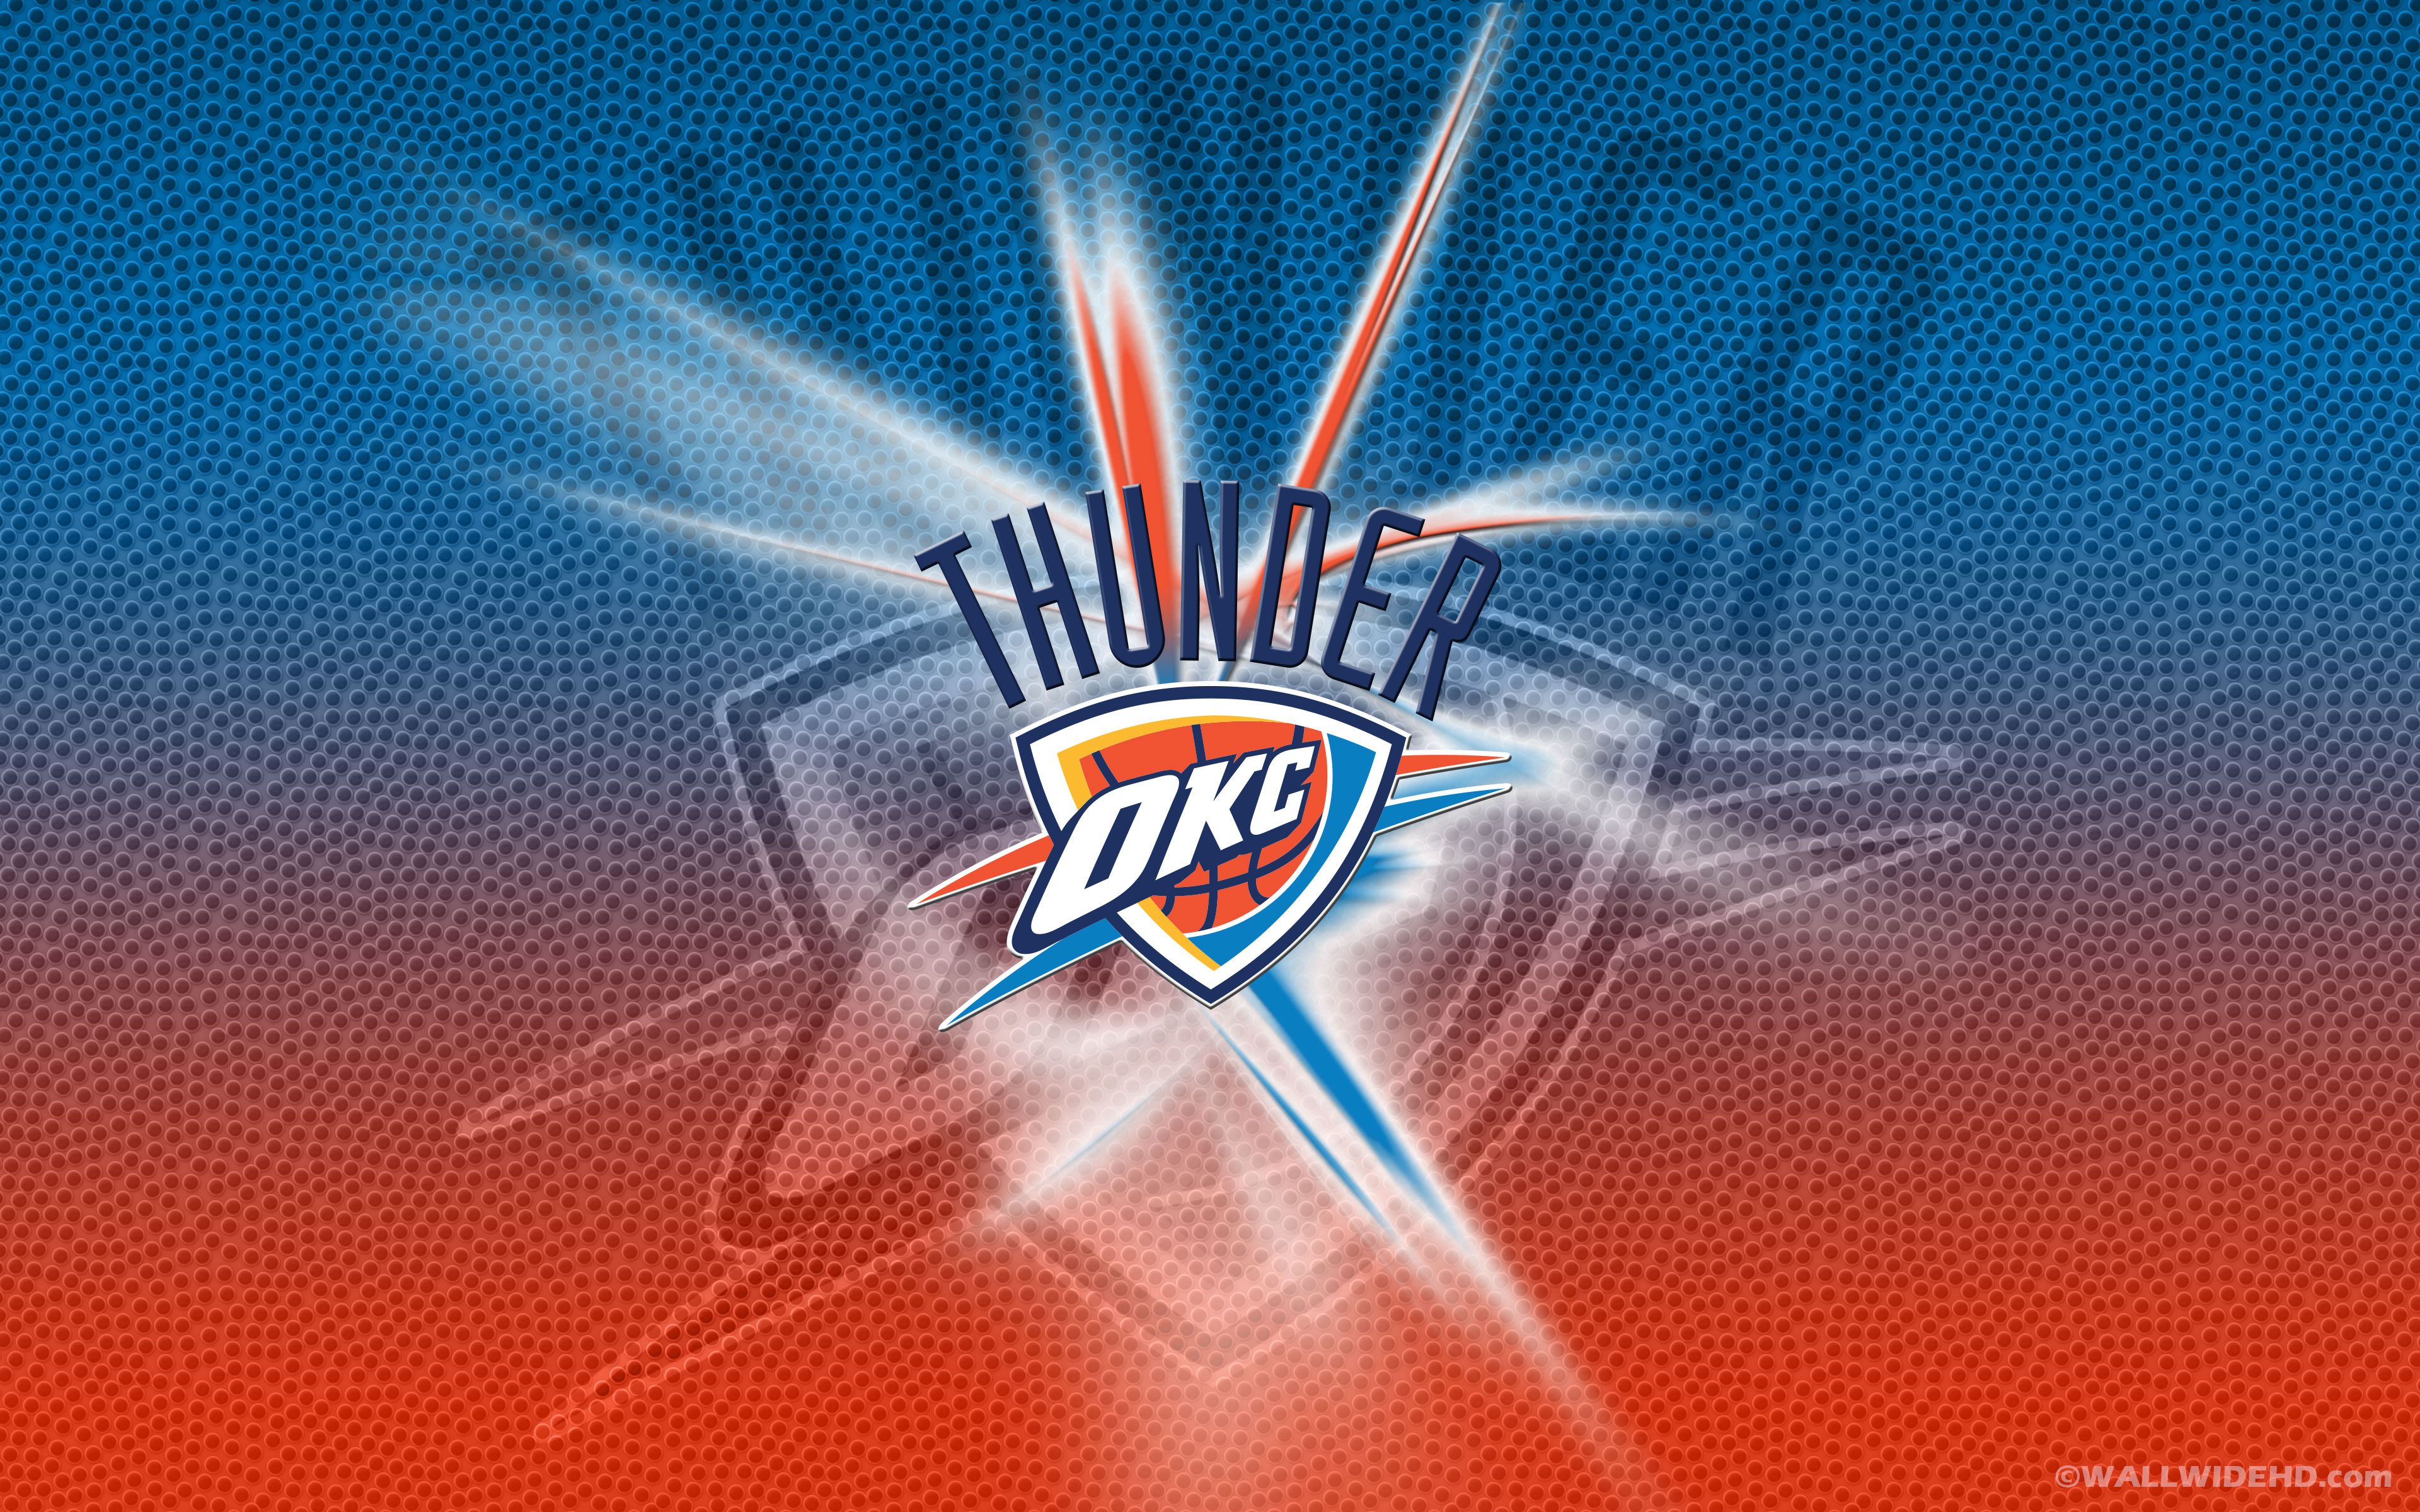 30+ Oklahoma City Thunder Wallpapers by Eir Lewton, GoldWallpapers